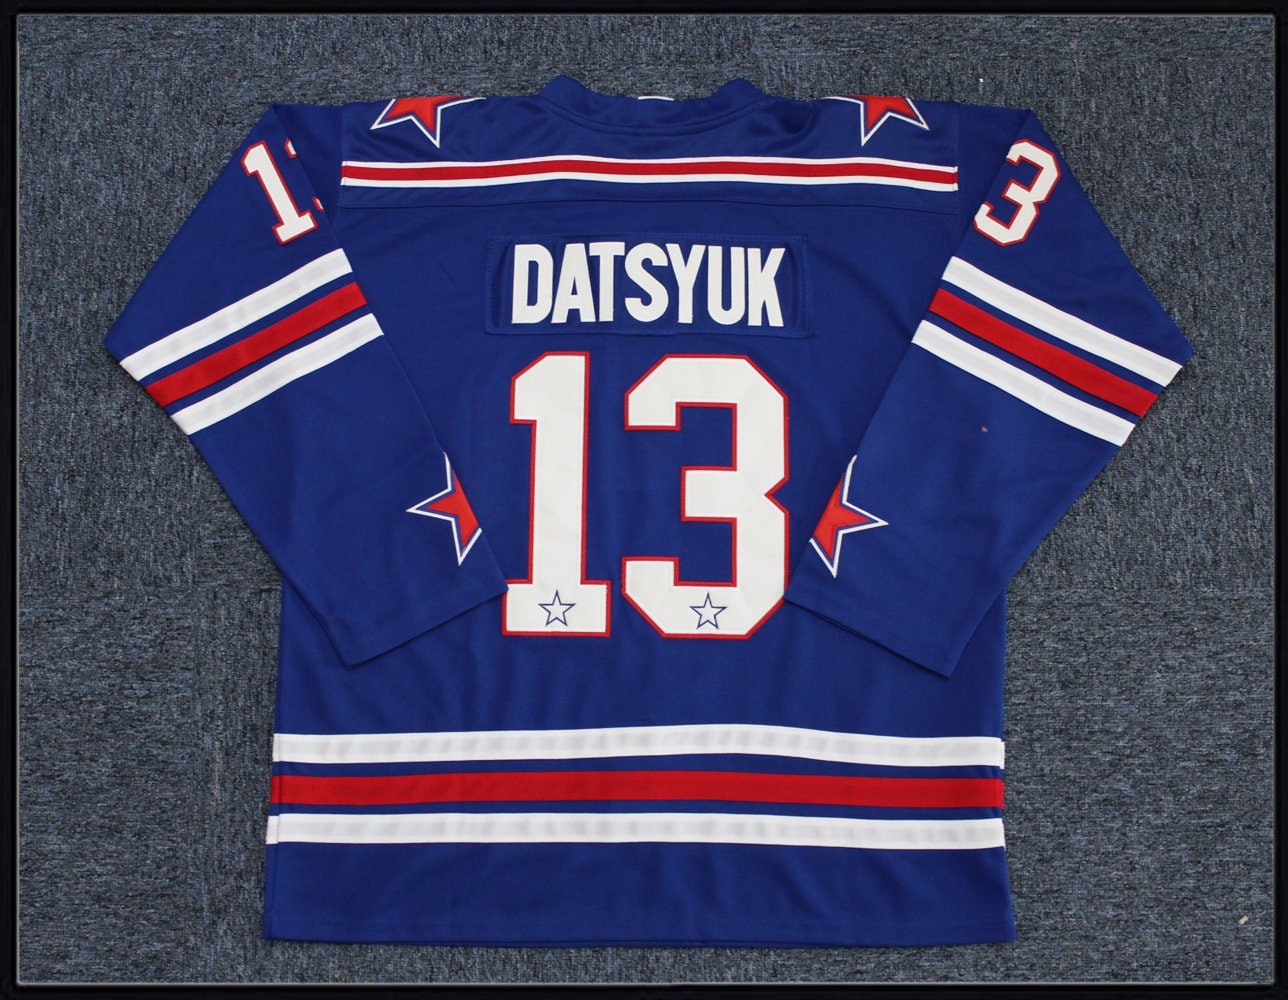 Detroit Red Wings #13 Pavel Datsyuk White Winter Classic Jersey on sale,for  Cheap,wholesale from China